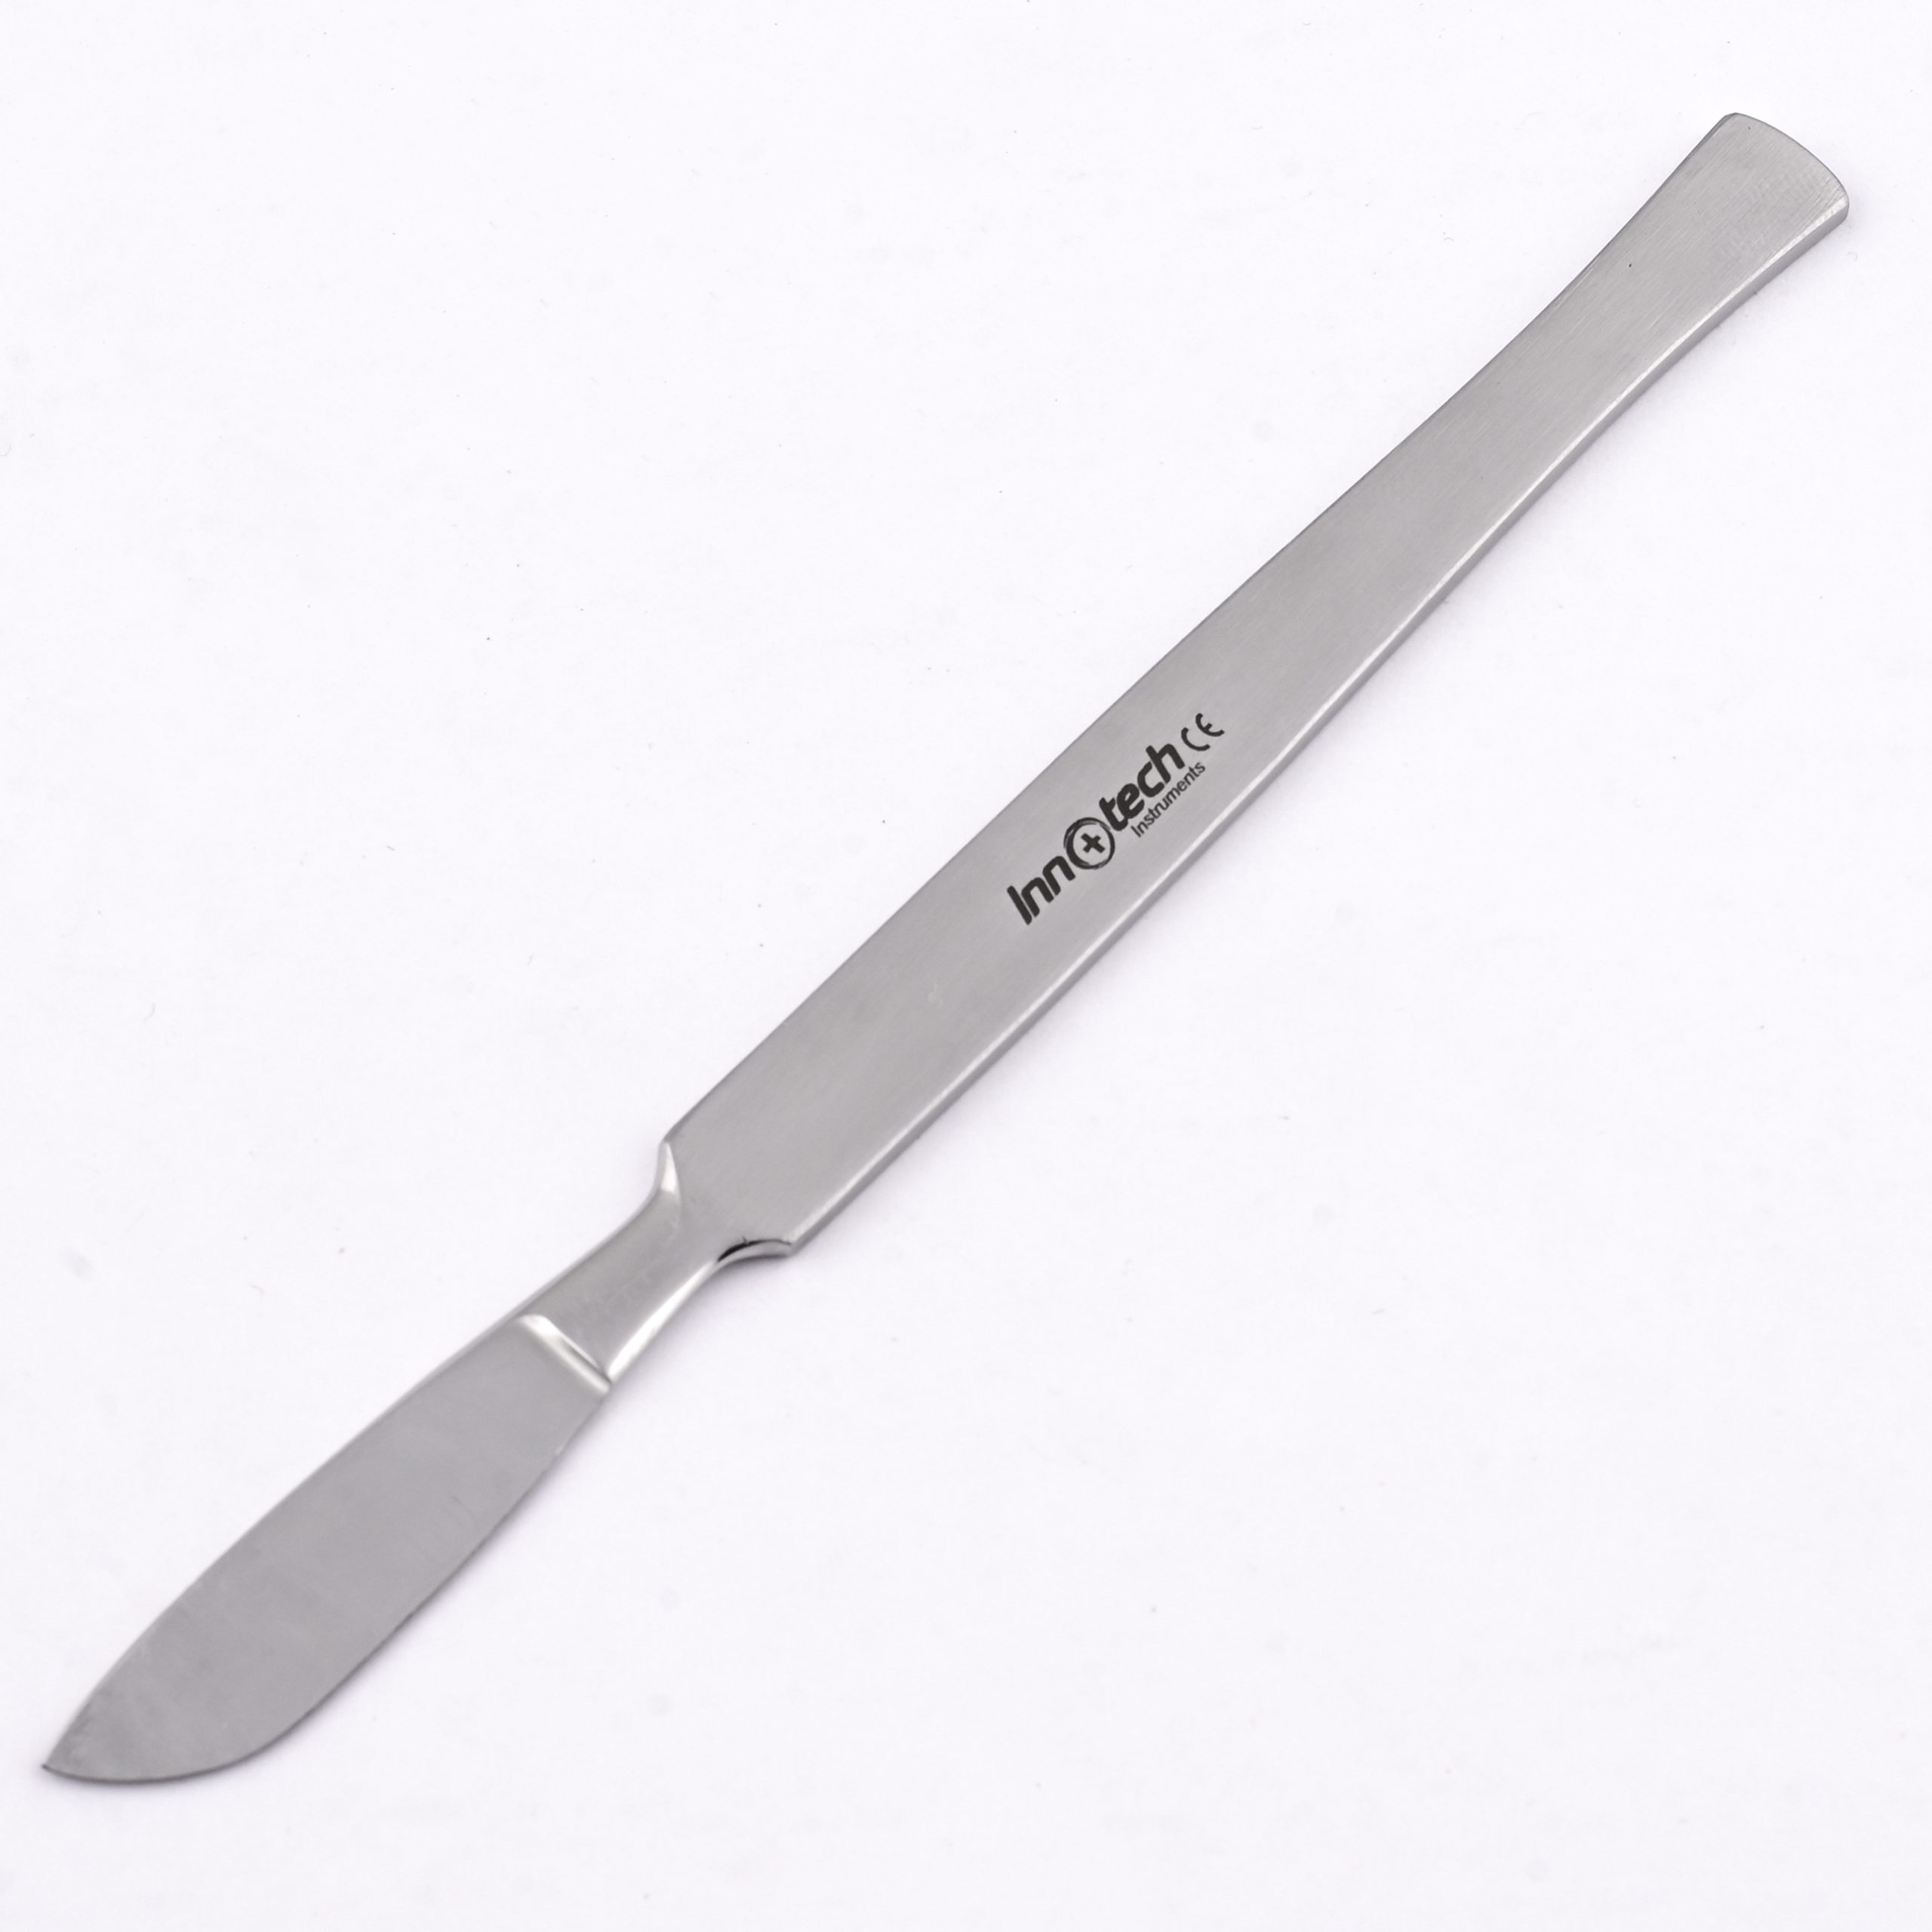 Professional pedicure using dieffenbach scalpel.Patient visiting  podiatrist.Medical pedicure procedure using special instrument with blade  knife holder.Foot treatment in SPA salon.Podiatry clinic Stock Photo by  ©juriymaslak.gmail.com 391840394